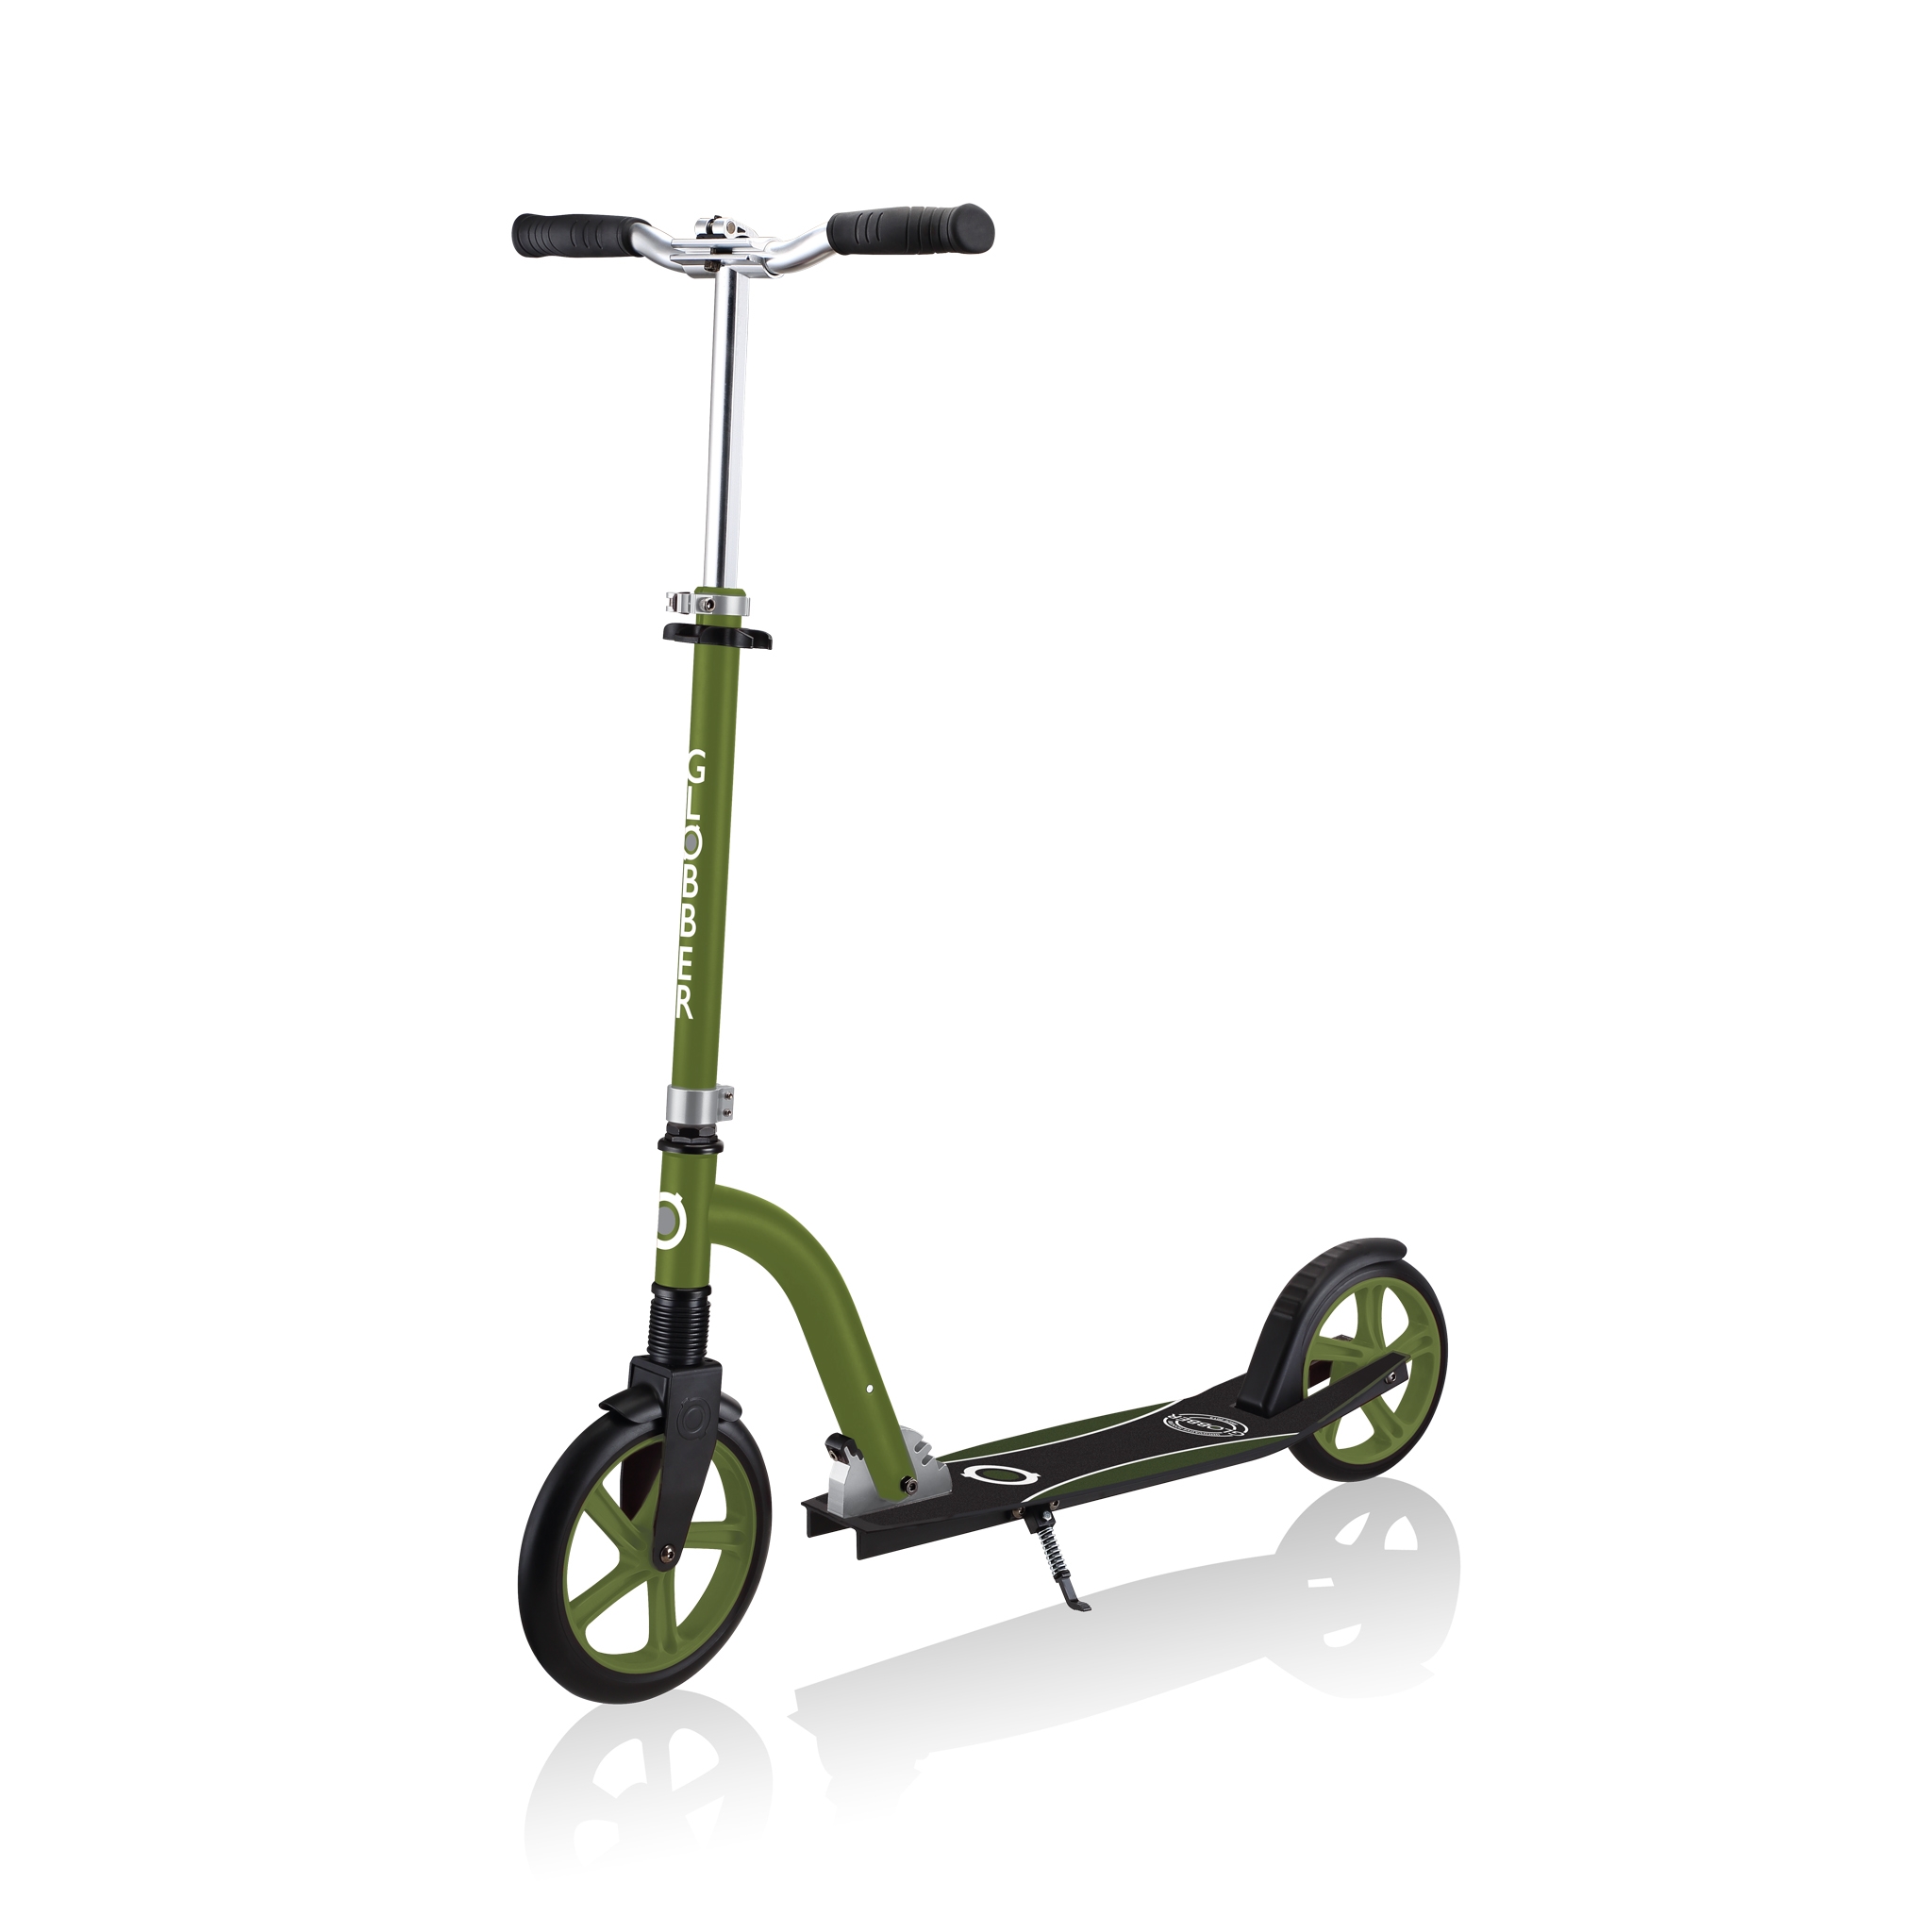 NL-230-205-DUO-best-big-wheel-scooters-for-kids-and-teens 7